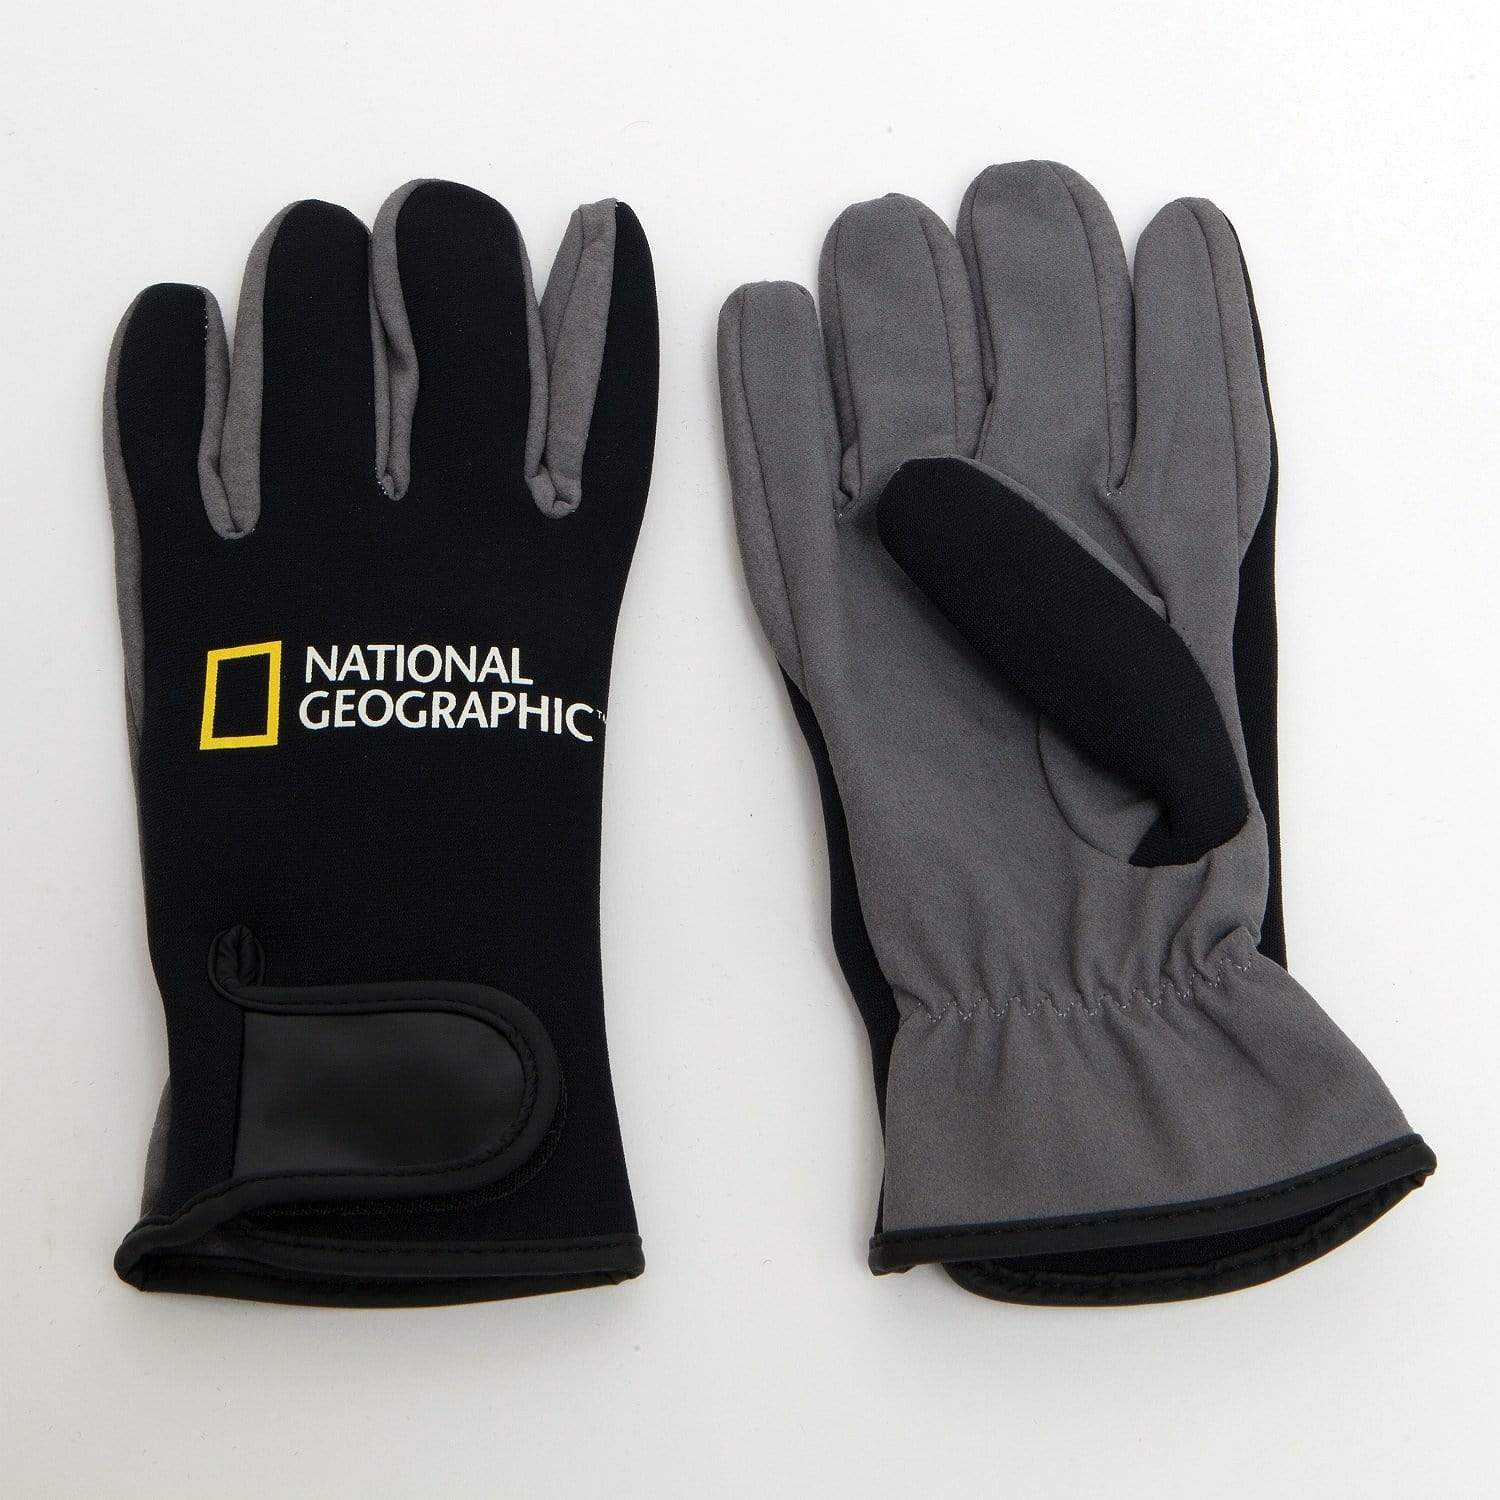 National Geographic Snorkeler Marine/Water Sports : Accessories Nat Geo Diving Neoprene Gloves - Large